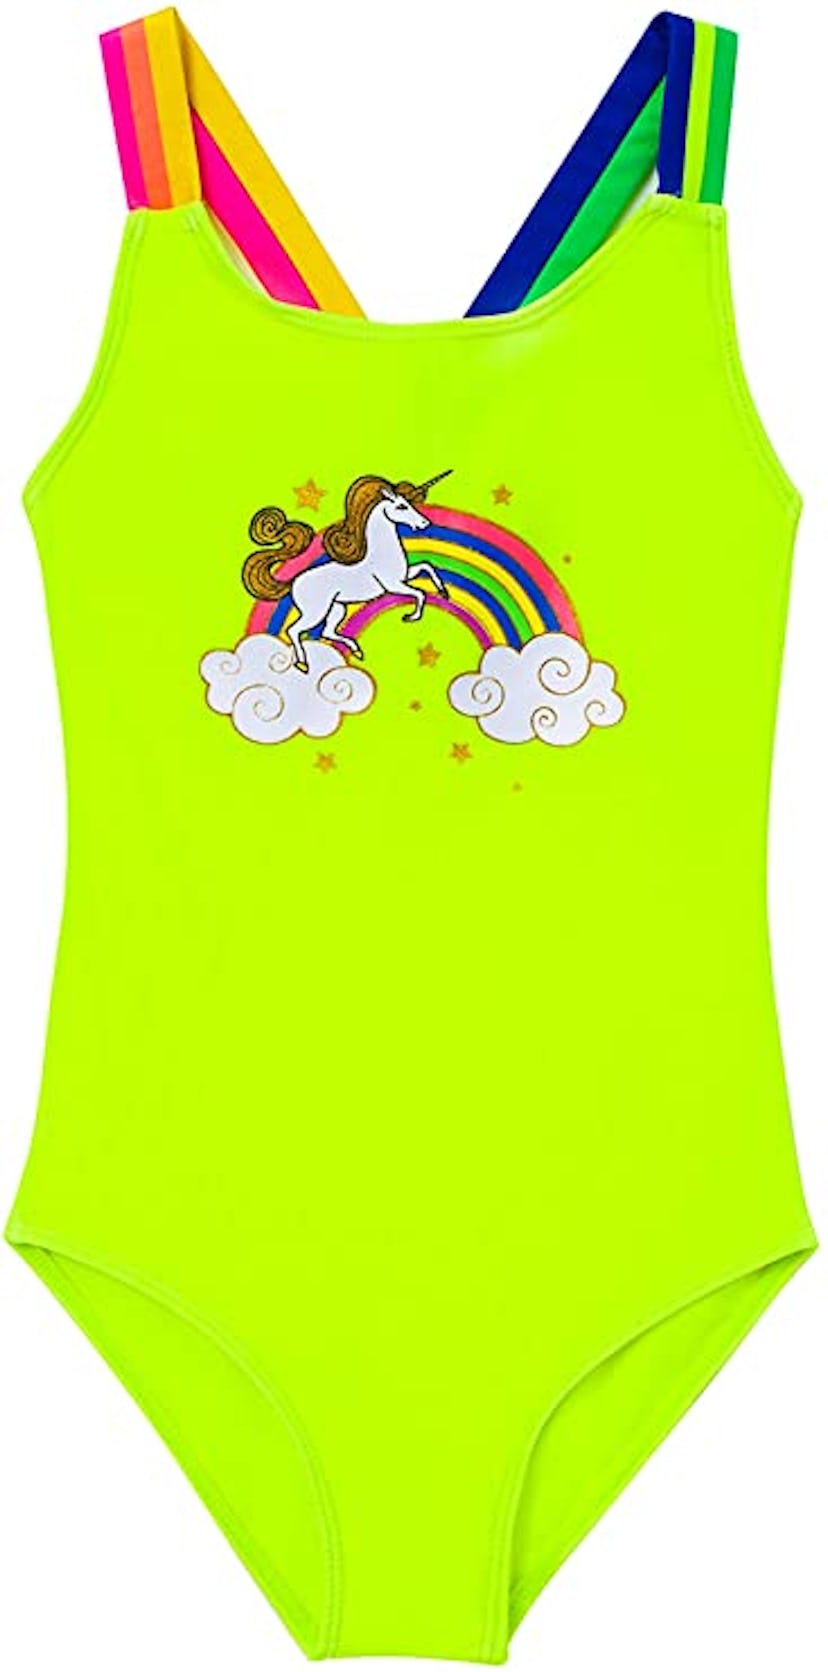 highlighter yellow unicorn rainbow toddler swimsuit for aquatic safety and visibility